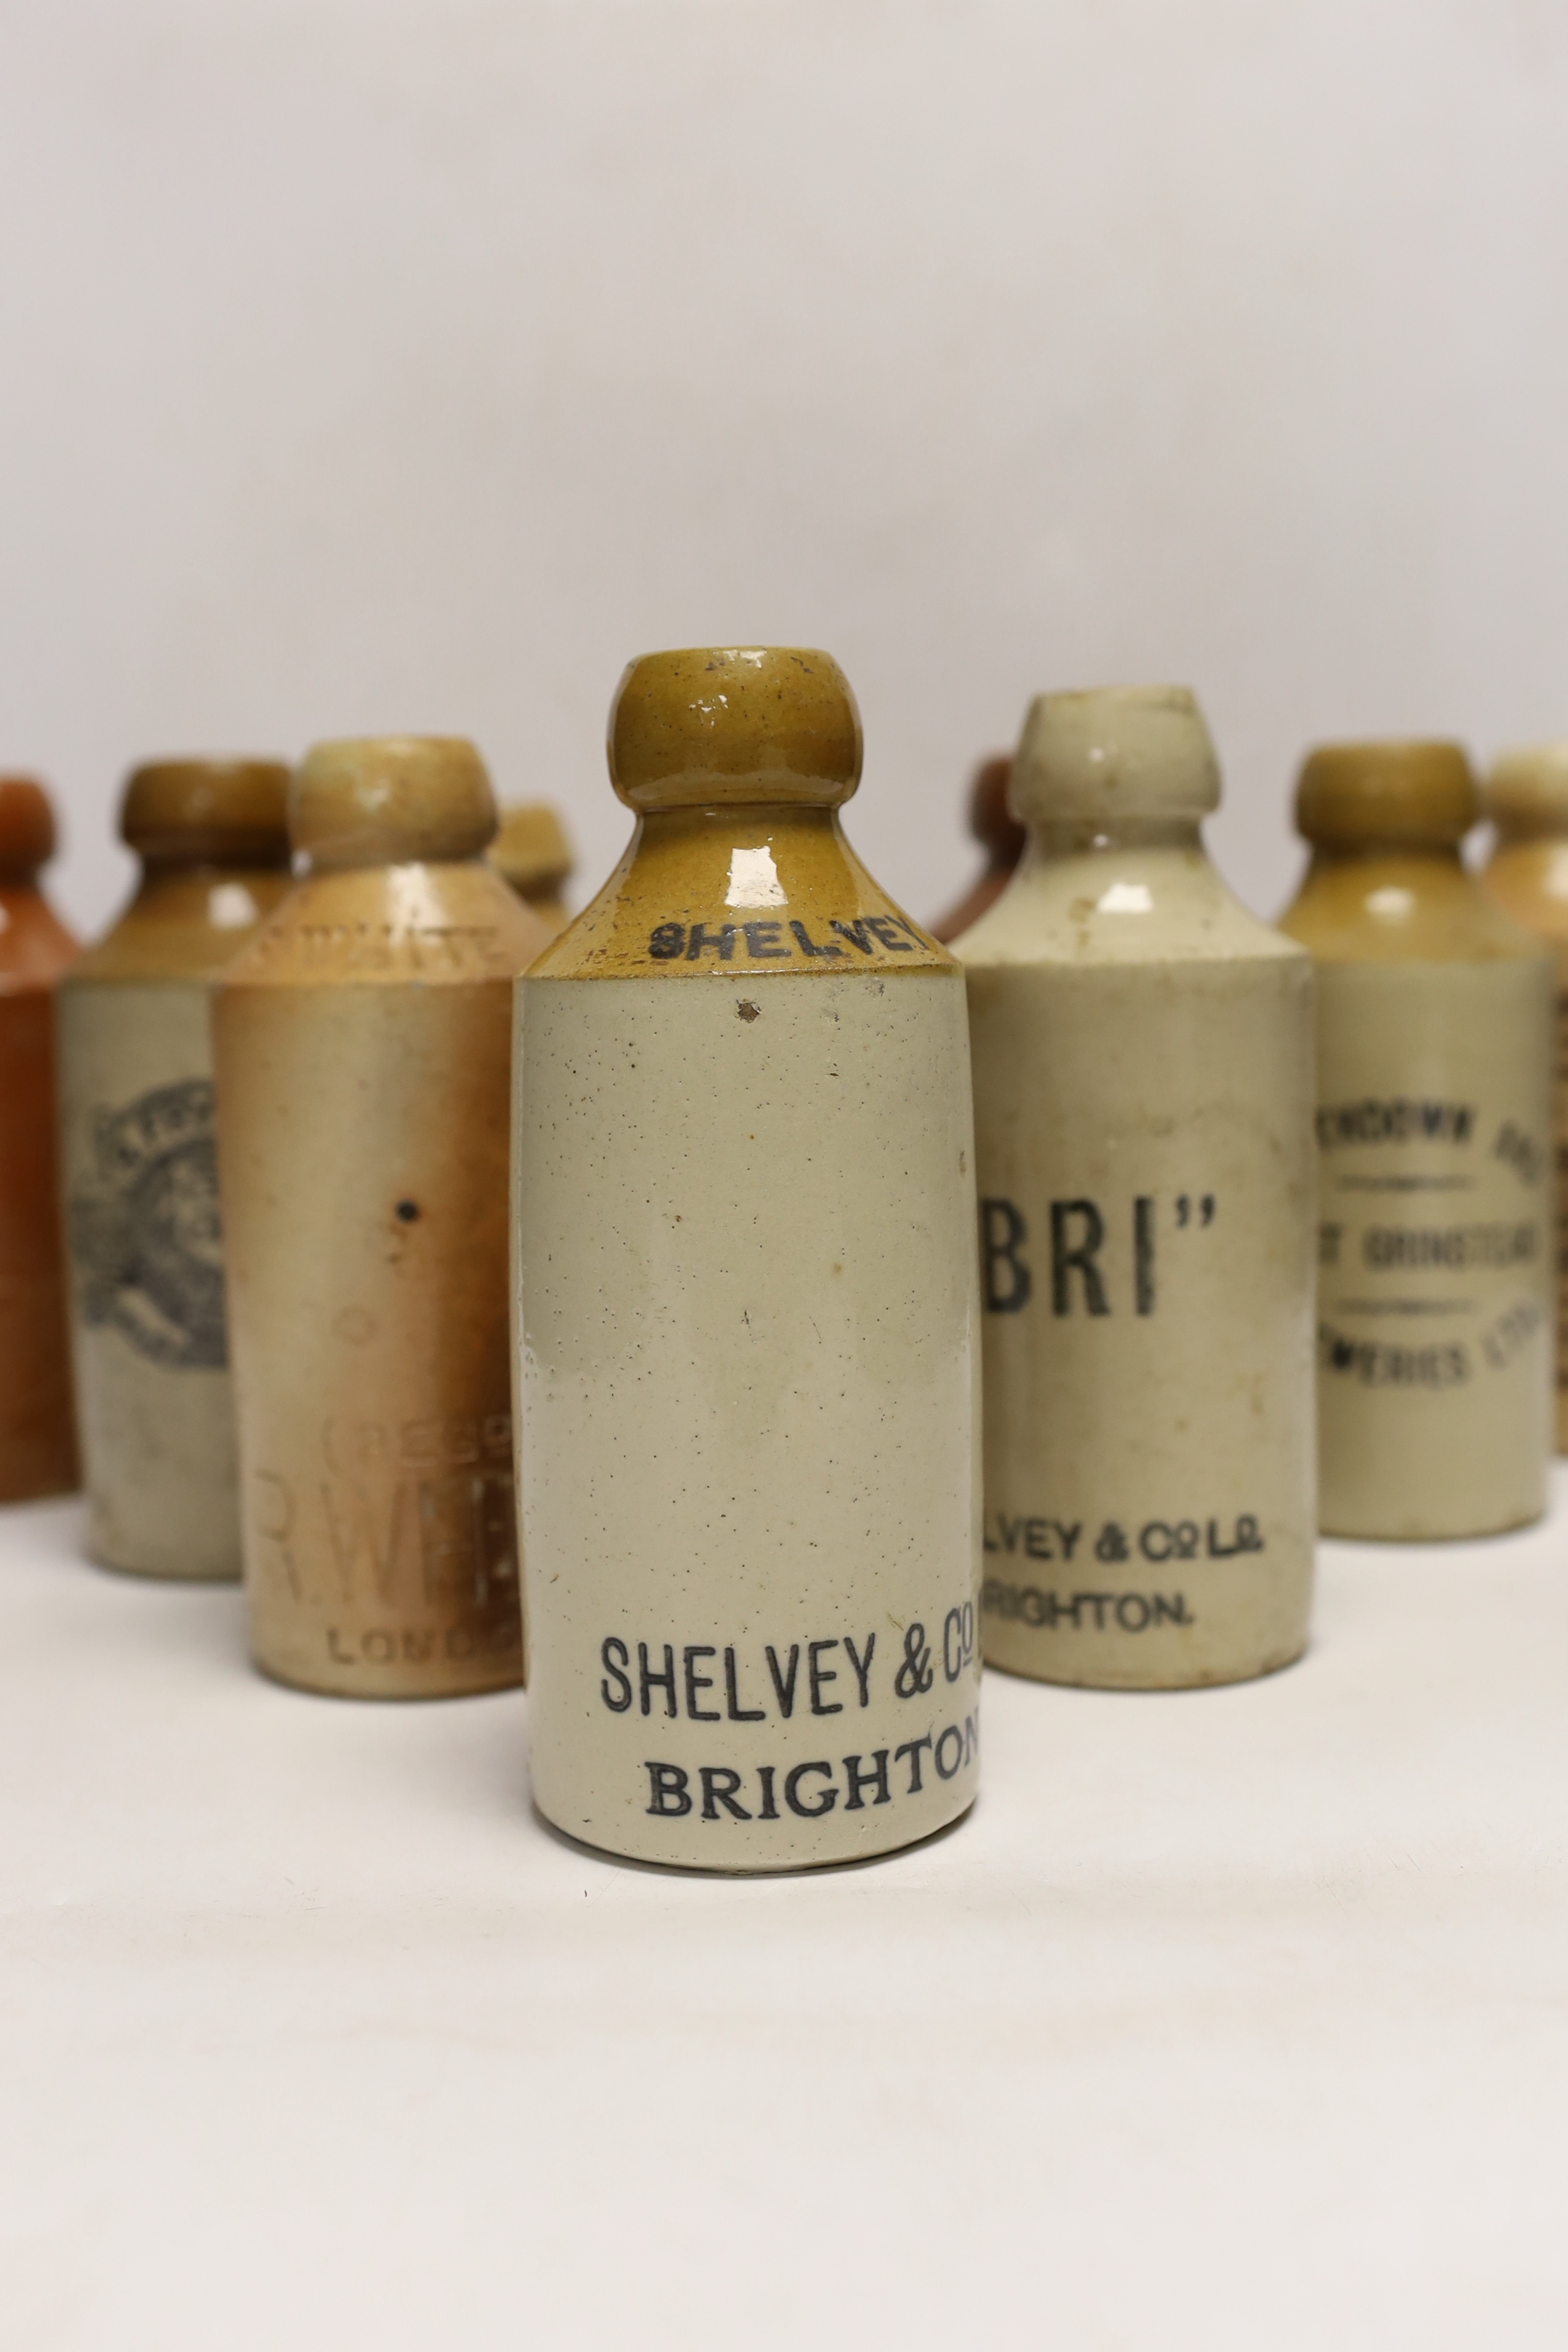 Early 20th century stoneware ginger beer bottles, two of Brighton, one of London, one of East Grinstead and four others